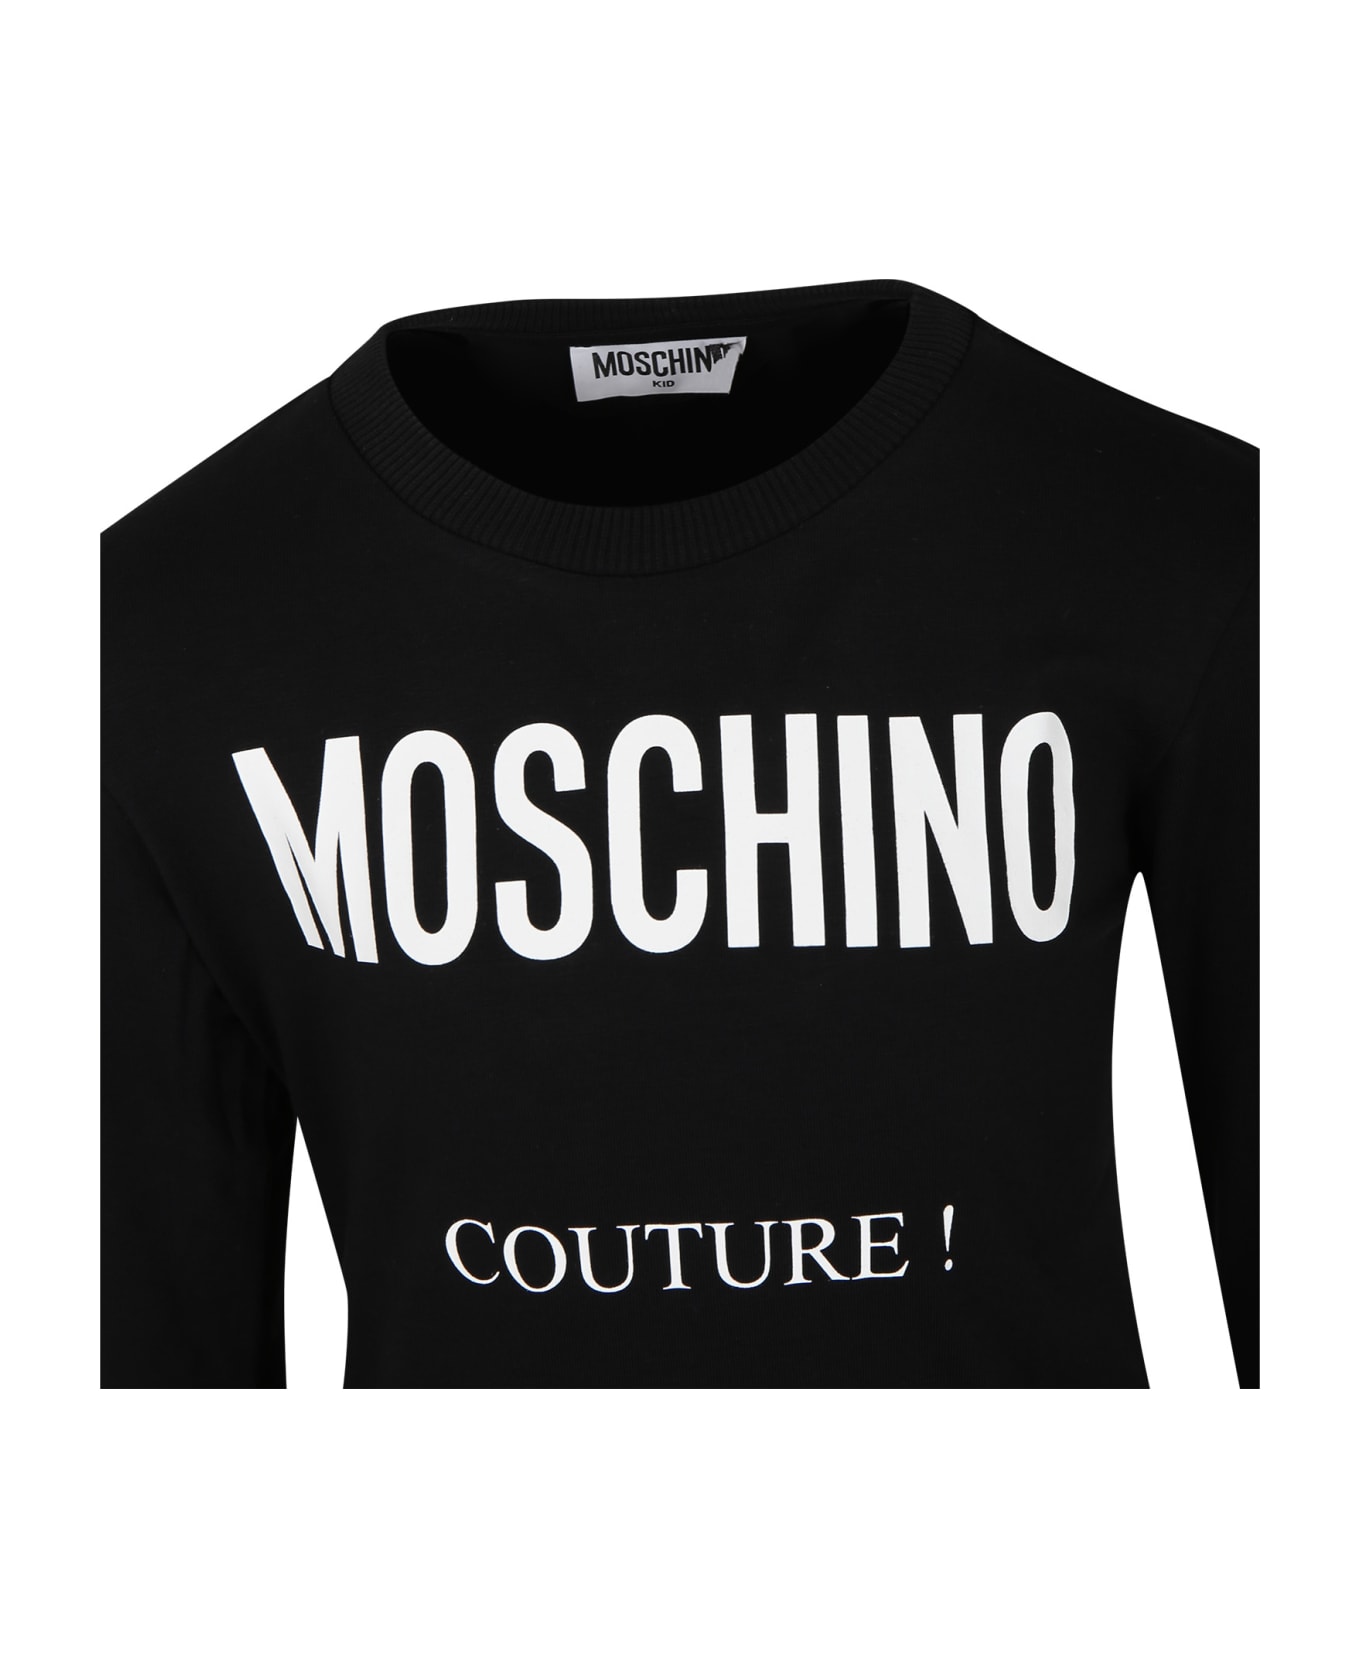 Moschino Black Set For Girl With Logo - Black